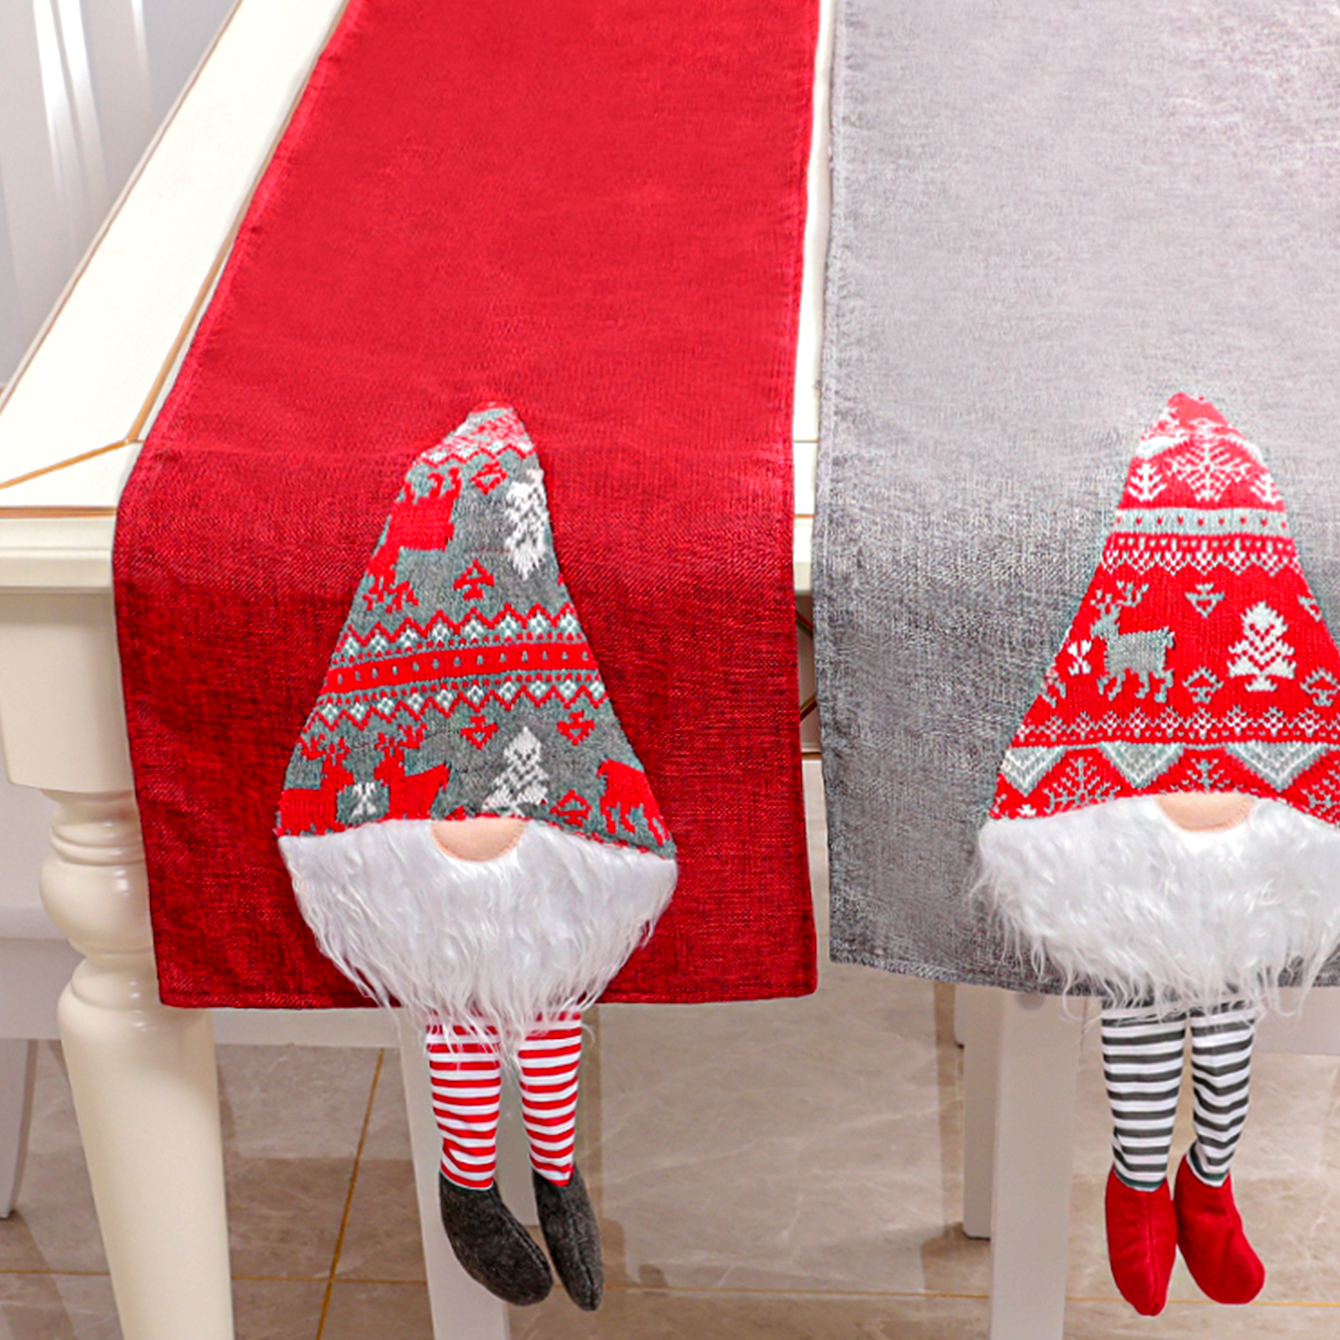 Christmas decoration faceless doll Rudolph dining table cloth redpicture4